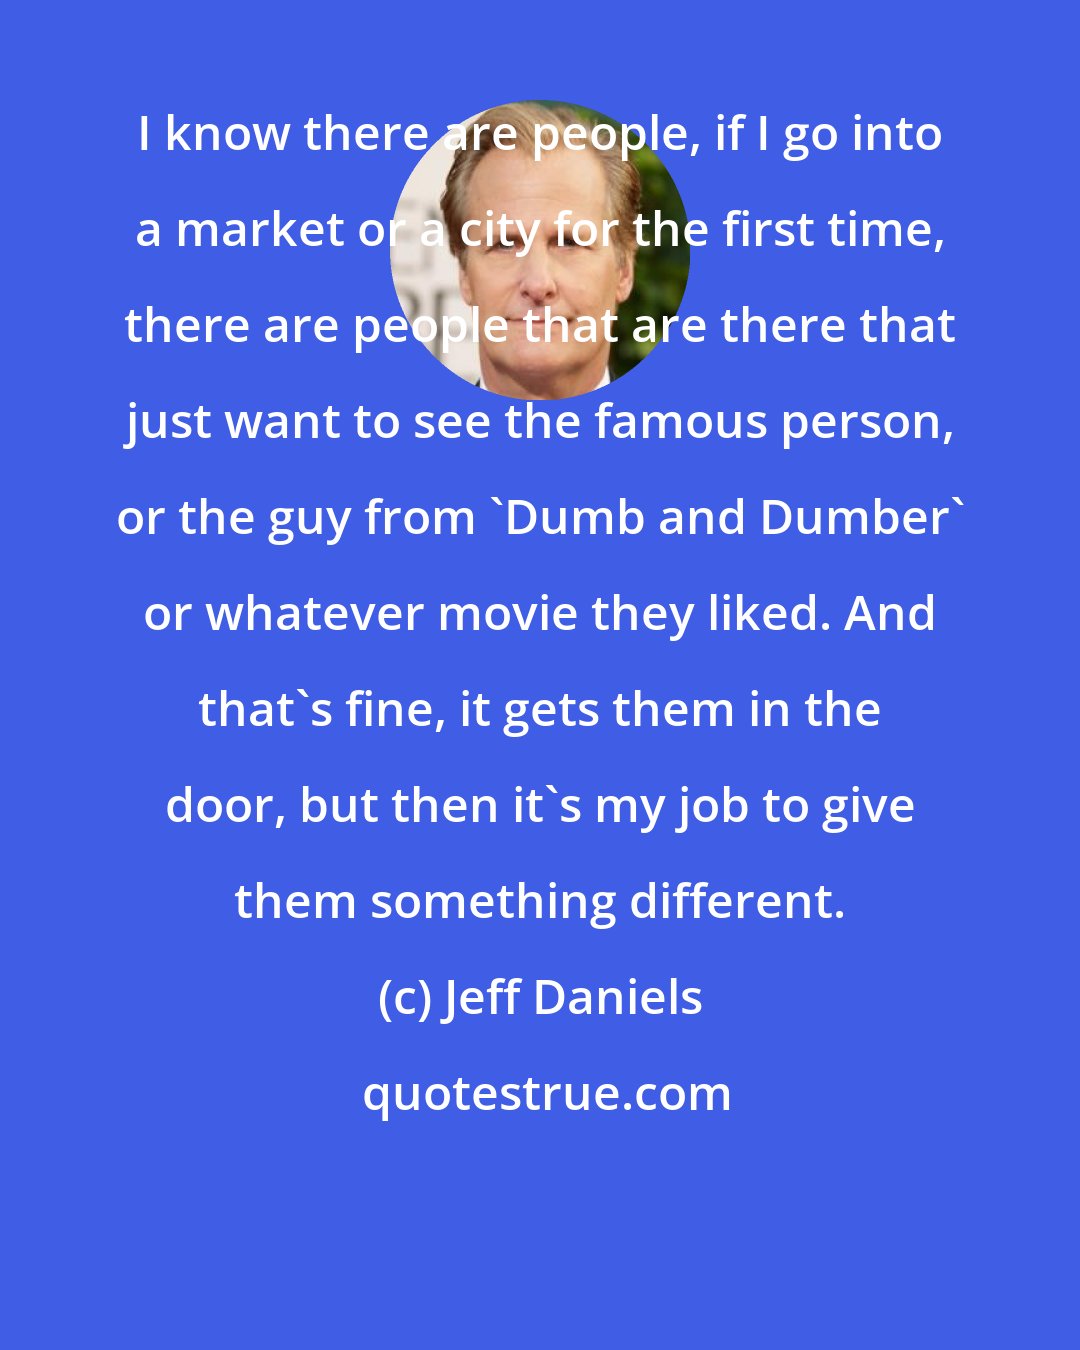 Jeff Daniels: I know there are people, if I go into a market or a city for the first time, there are people that are there that just want to see the famous person, or the guy from 'Dumb and Dumber' or whatever movie they liked. And that's fine, it gets them in the door, but then it's my job to give them something different.